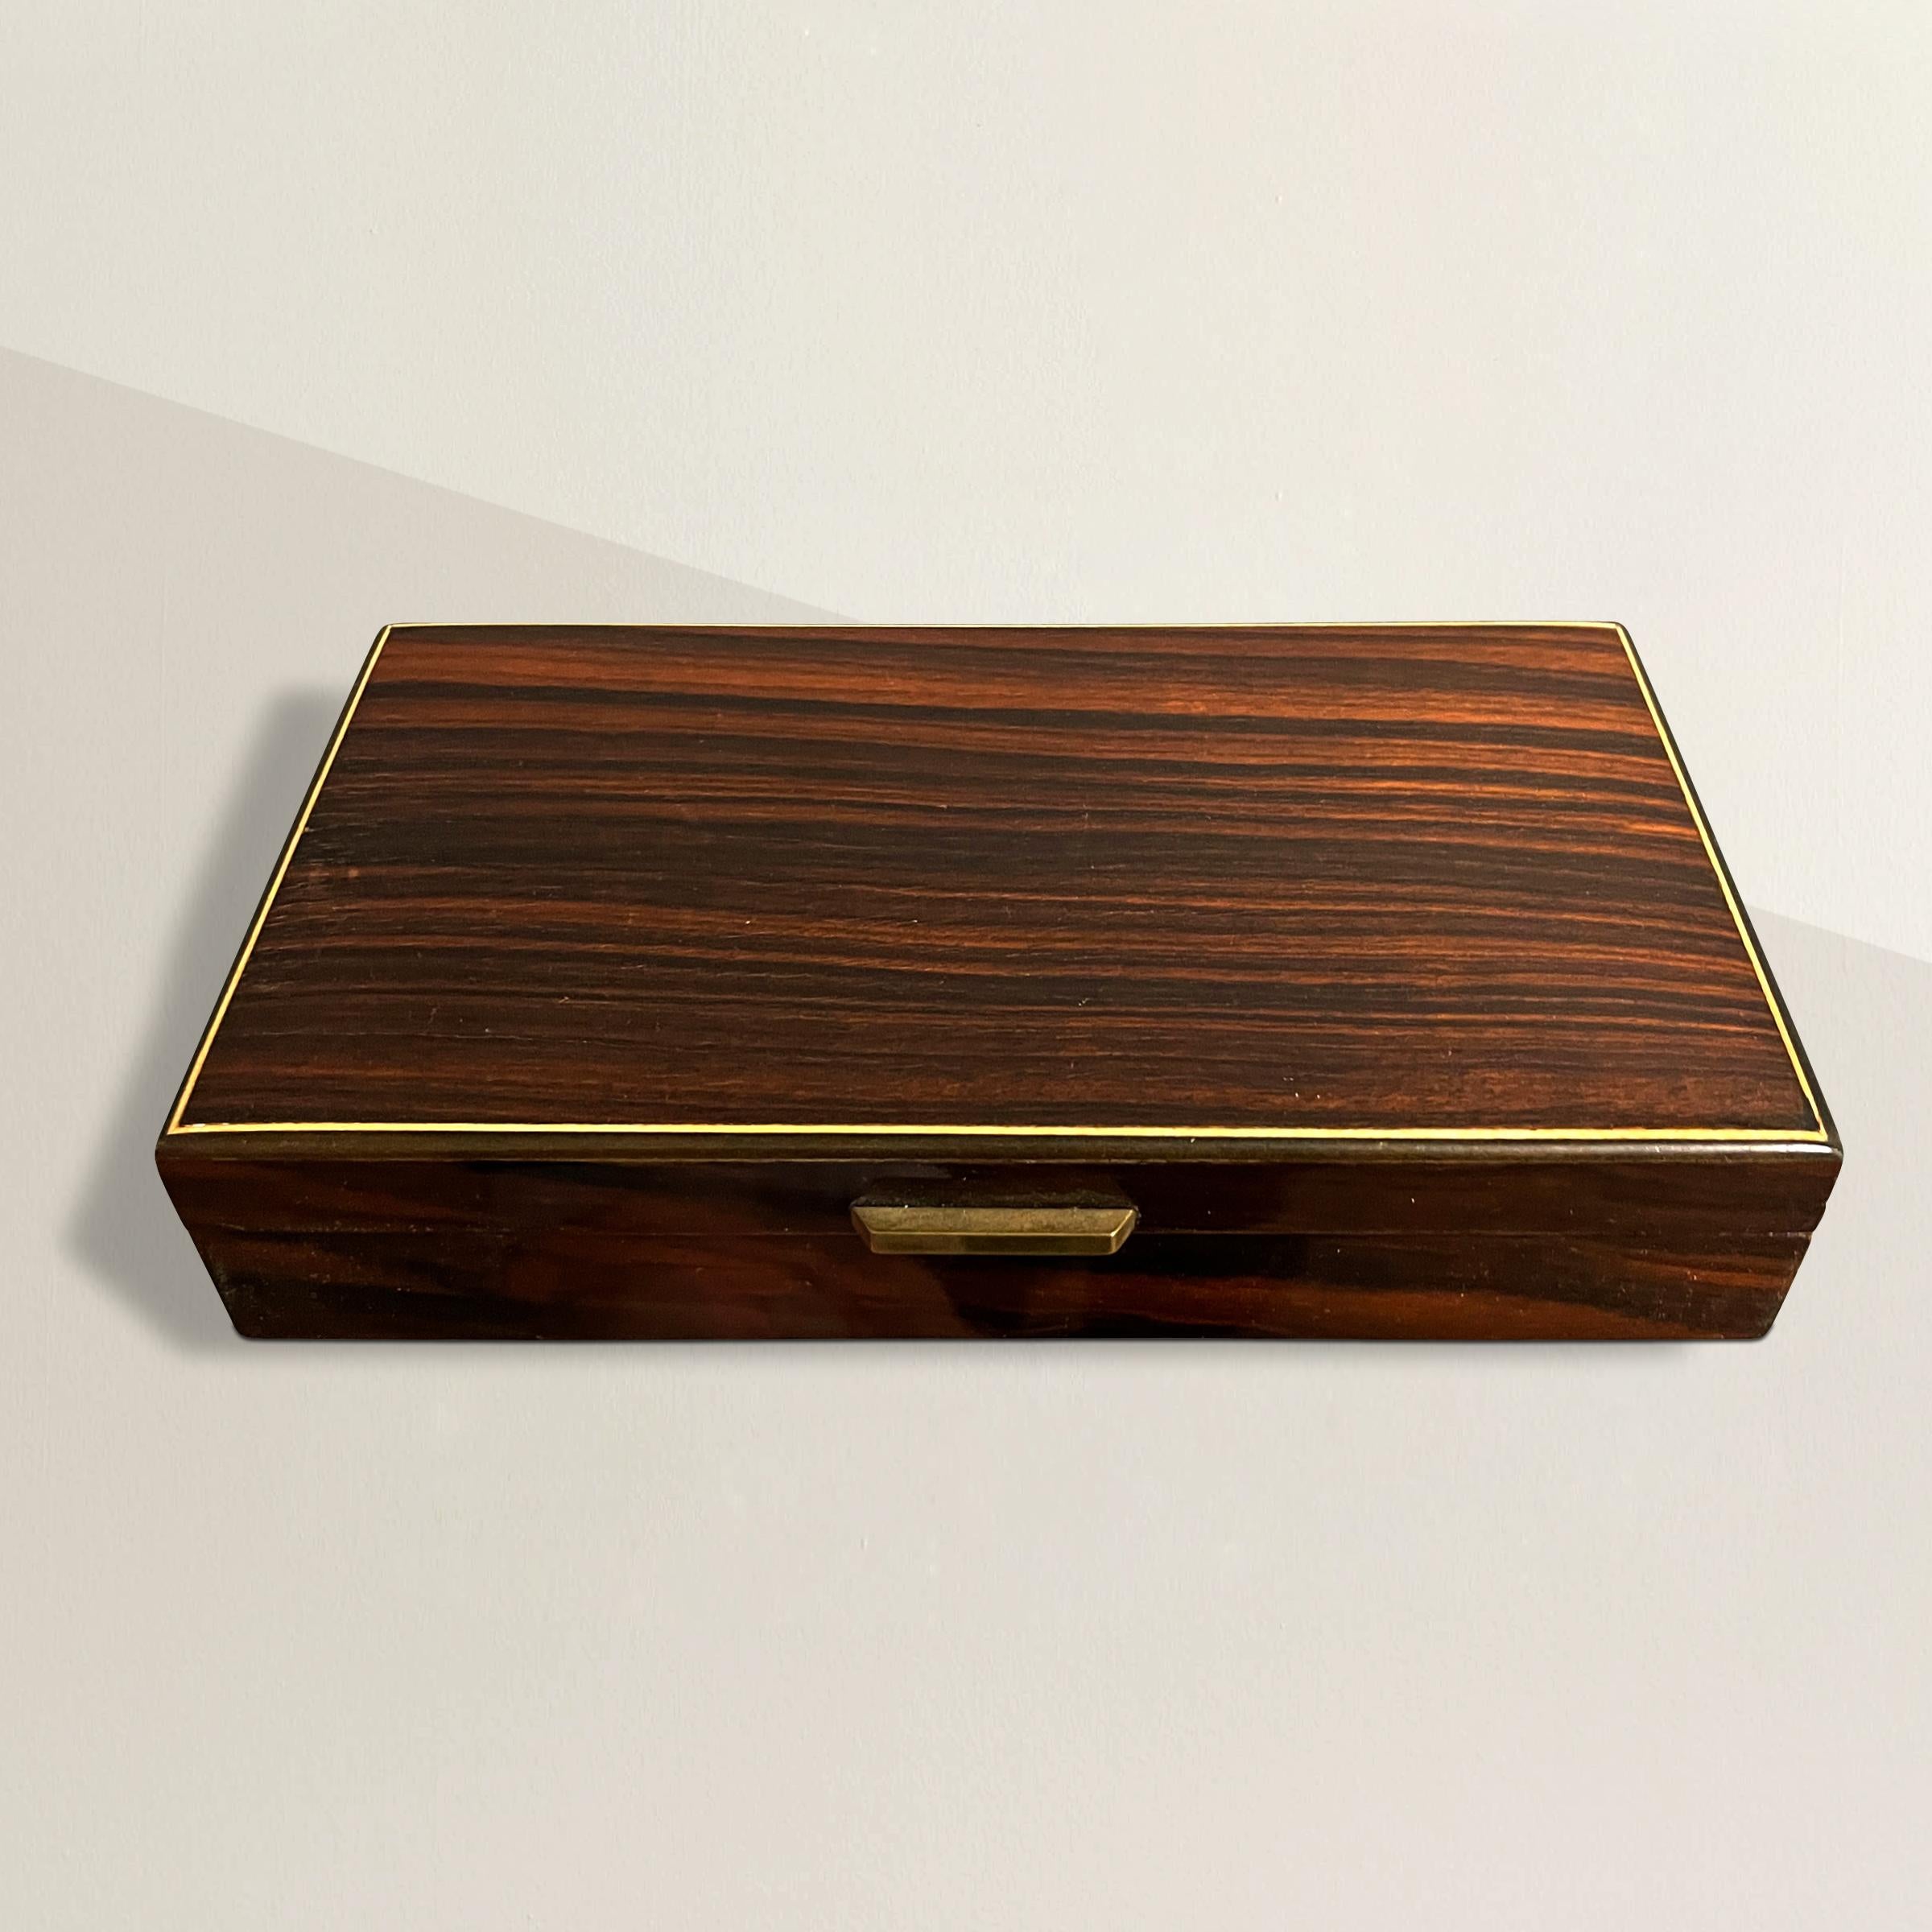 A striking early 20th century Austrian box with ebony veneer over birch and with a thin fruitwood inlaid stripe around the lid. A simple brass handle allows the lid to be opened. Perfect for storing playing cards, keys, coins, or any other myriad